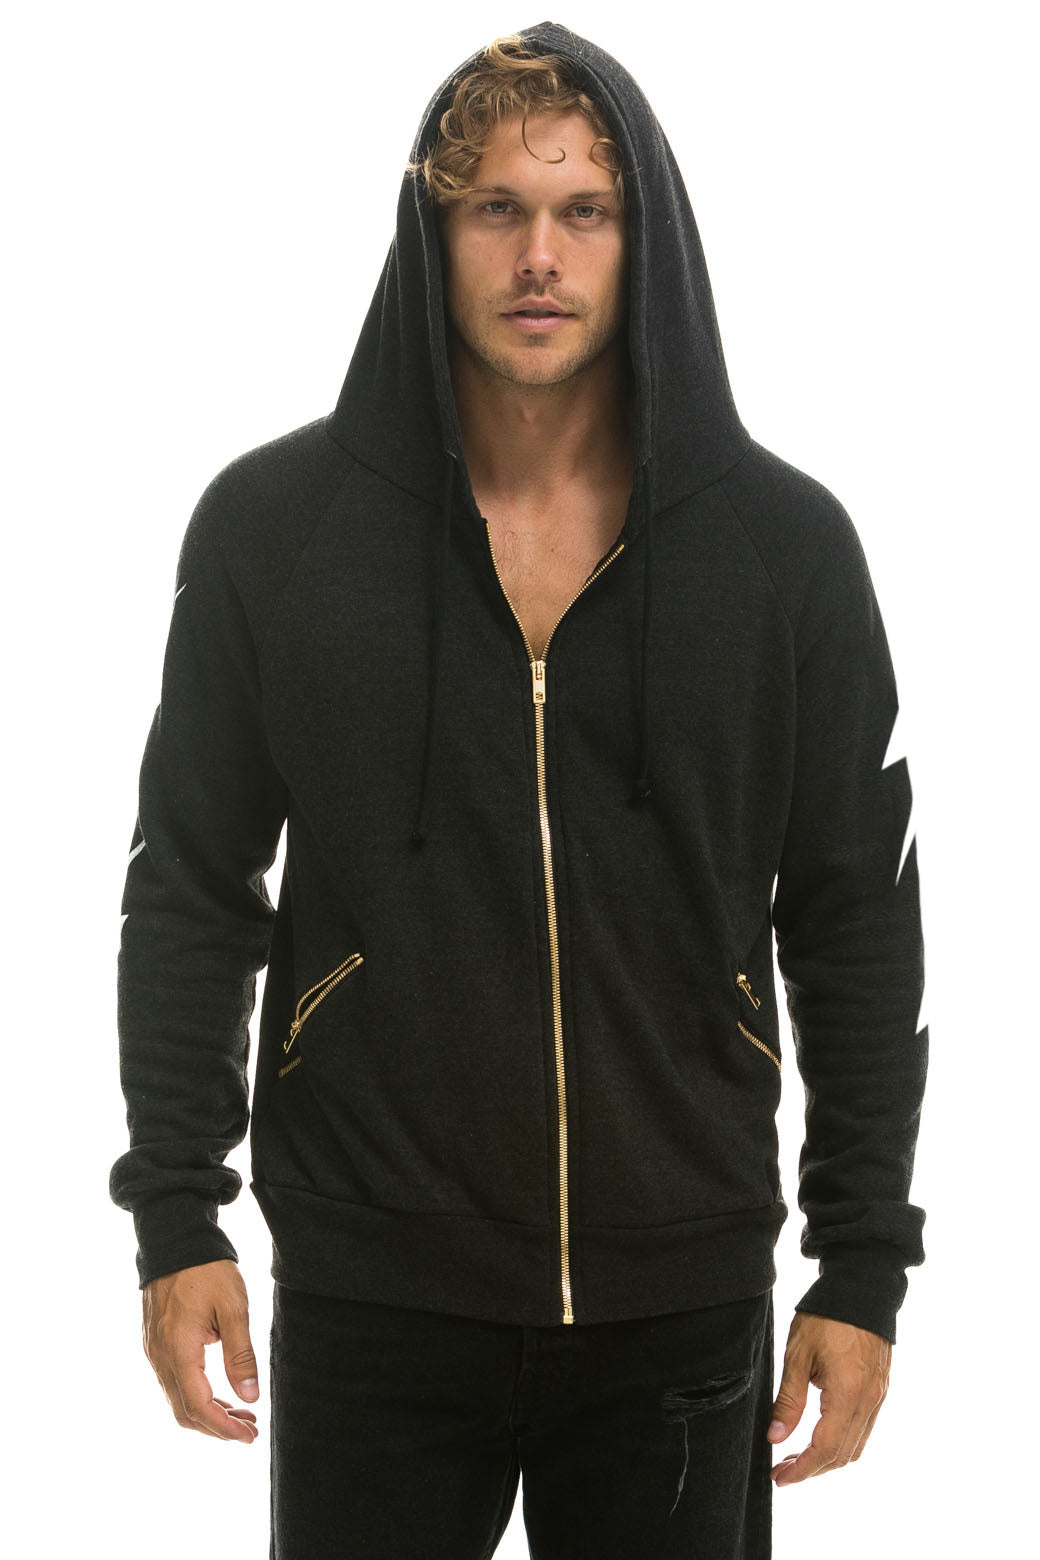 BOLT 4 ZIP HOODIE RELAXED WITH POCKETS - BLACK Hoodie Aviator Nation 